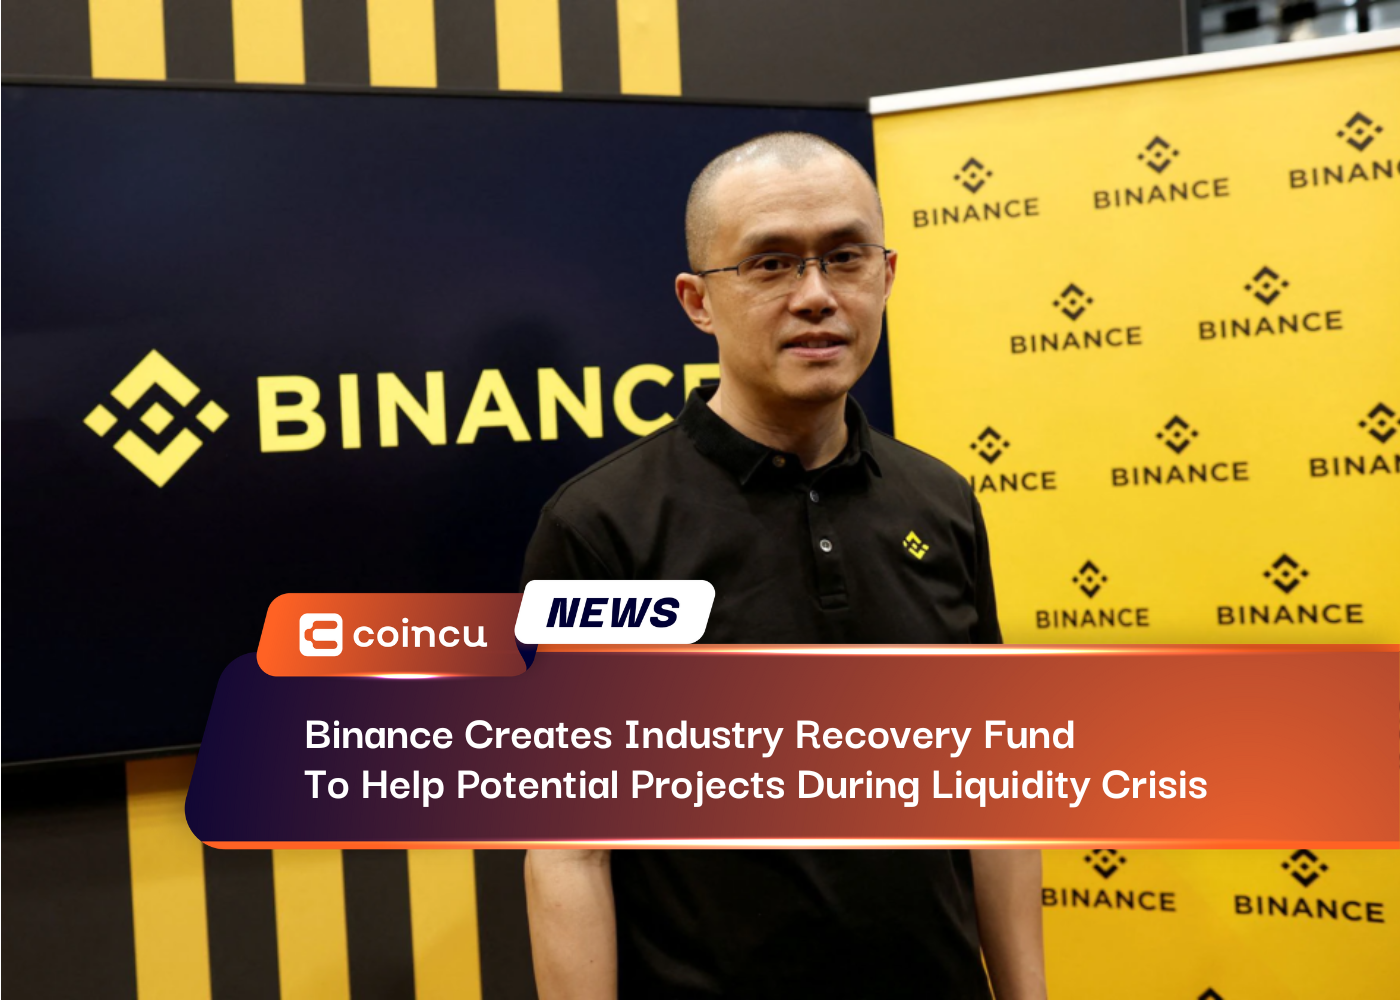 Binance Creates Industry Recovery Fund To Help Potential Projects During Liquidity Crisis